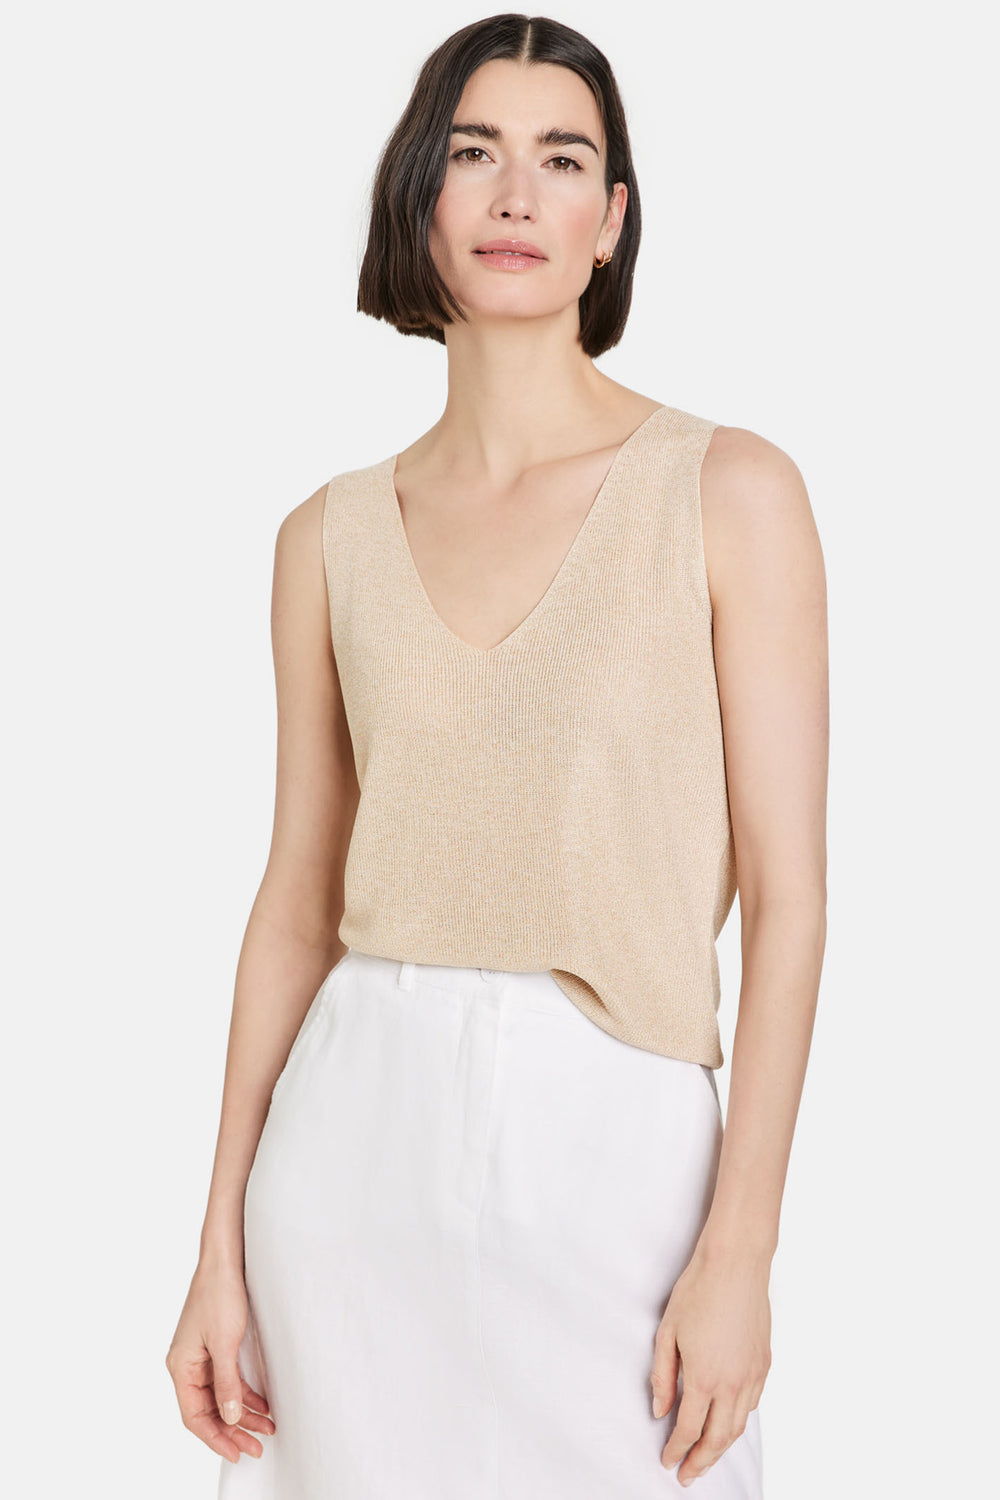 Gerry Weber 371031 Oatmeal Knitted Vest Top - Experience Boutique